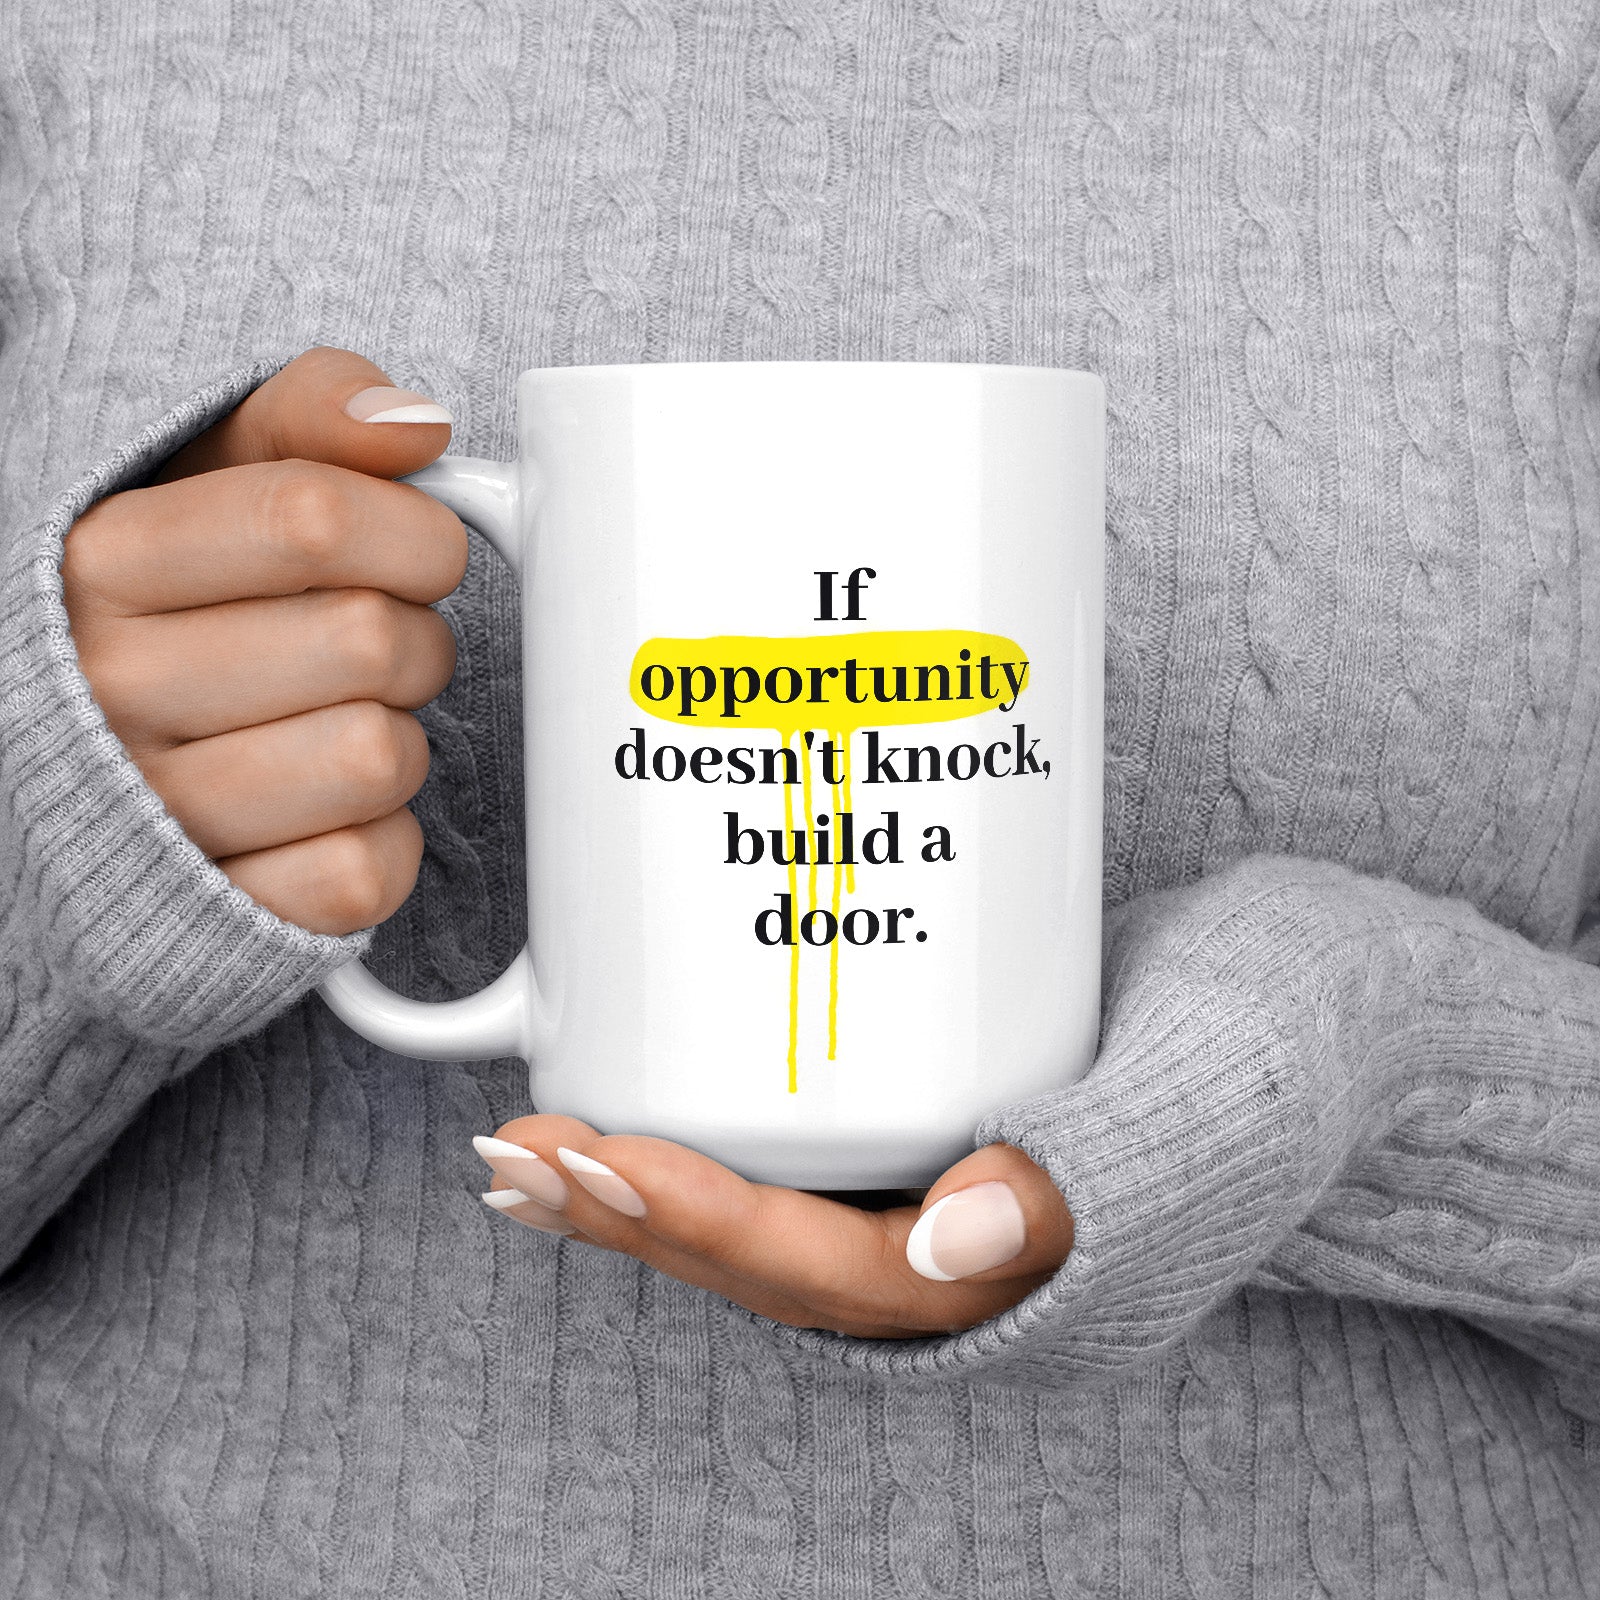 Be inspired by Milton Berle's famous quote, "If opportunity doesn't knock, build a door" on this white and glossy 15oz coffee mug with the handle on the left.